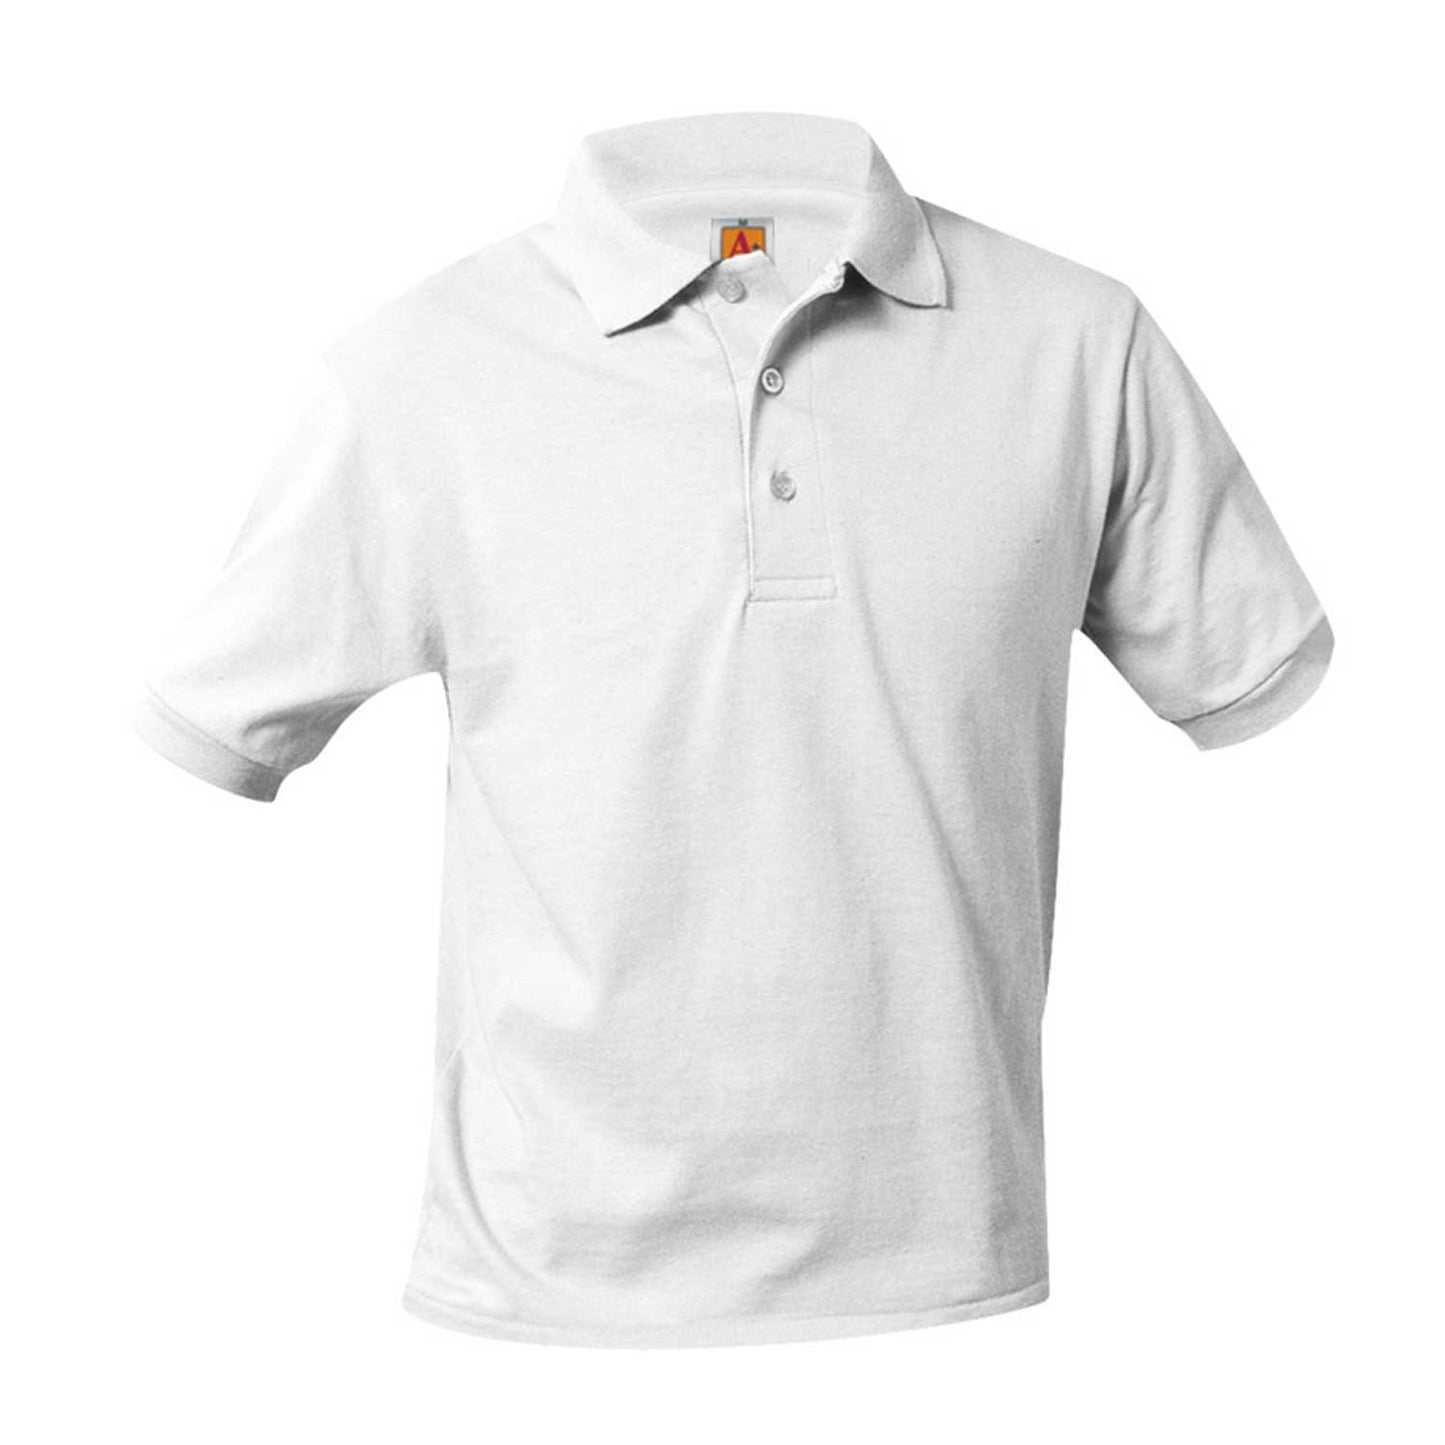 CA Unisex Smooth Knit Polo Shirt